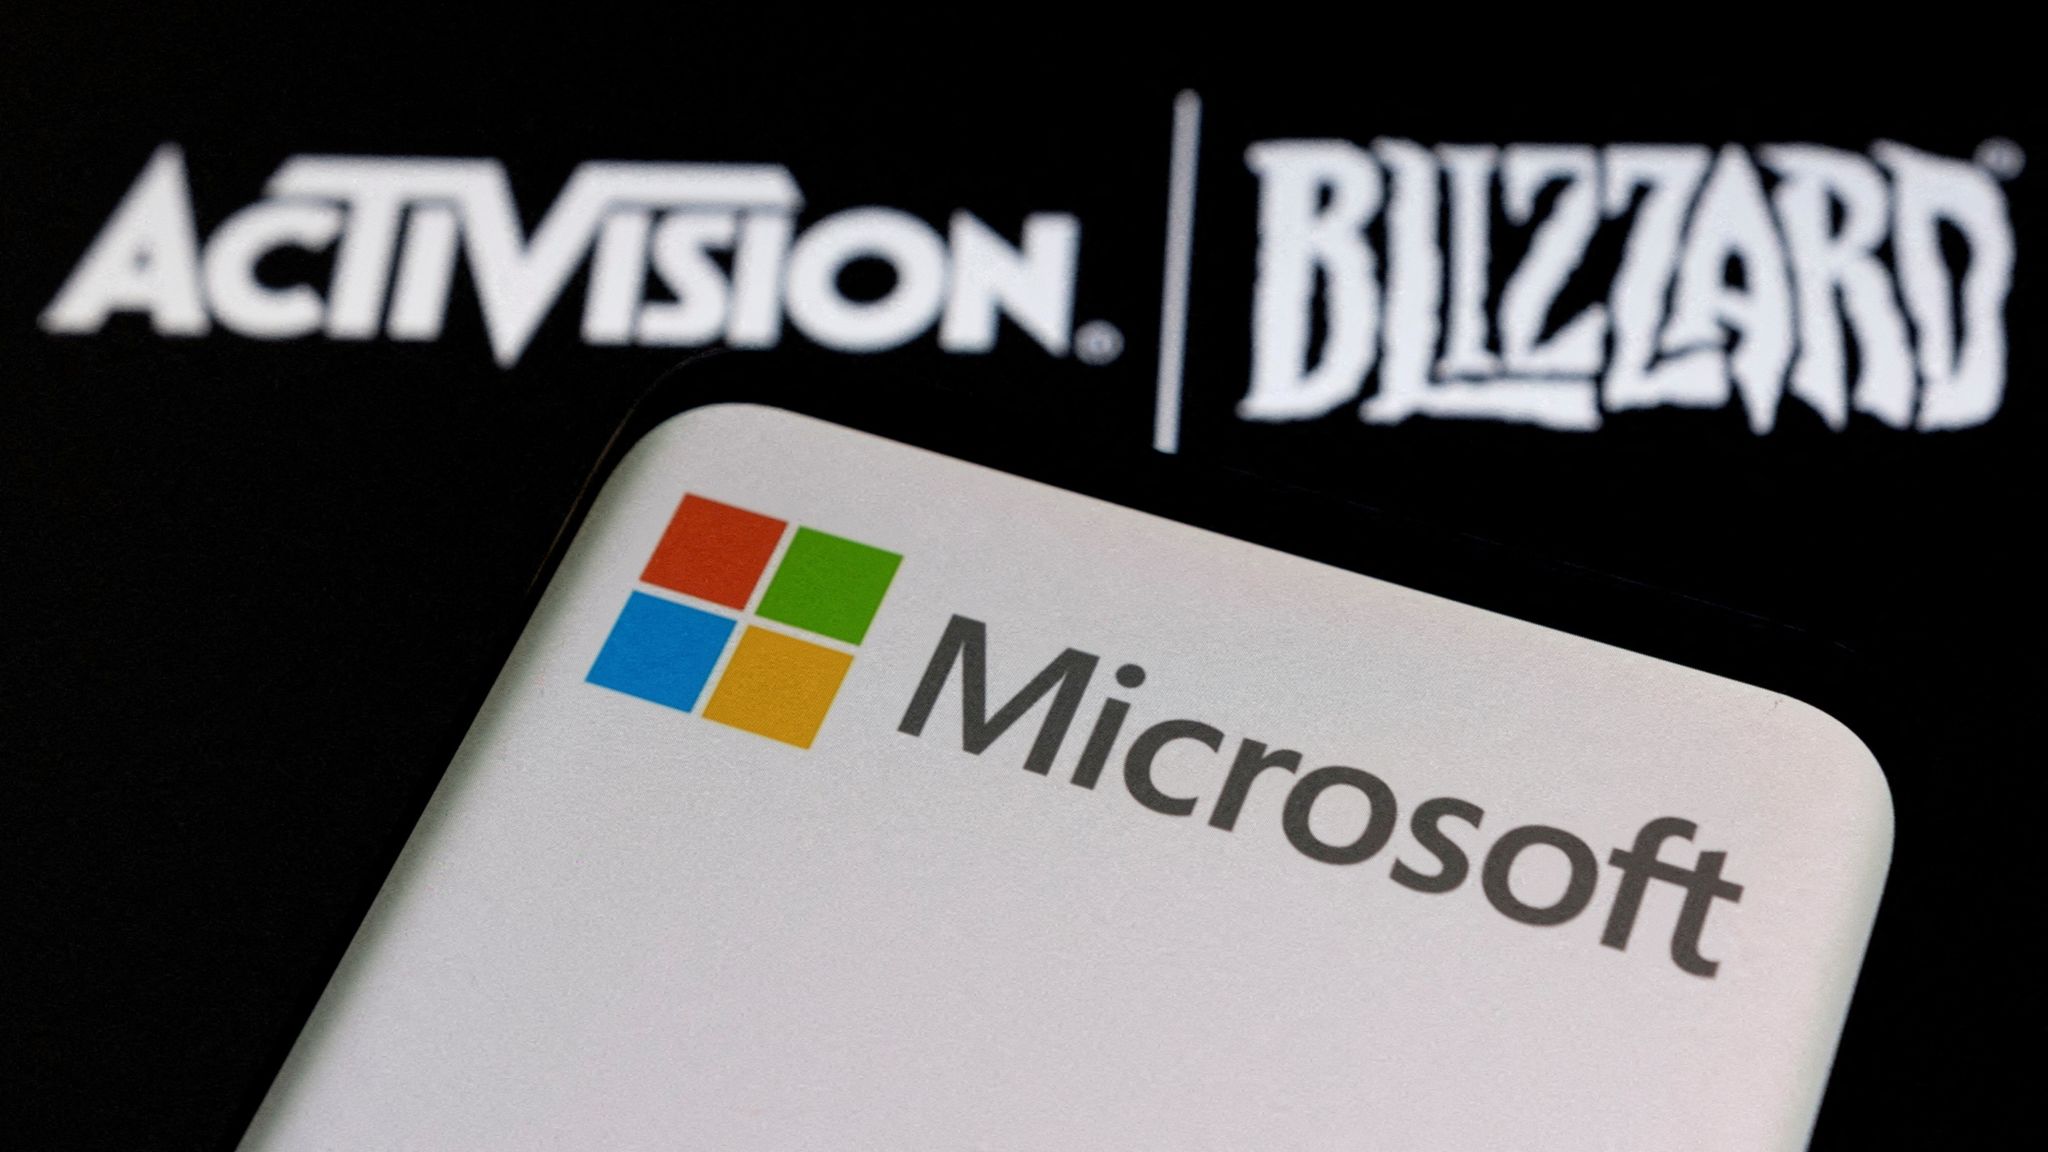 Microsoft + Activision Blizzard - by The Science of Hitting